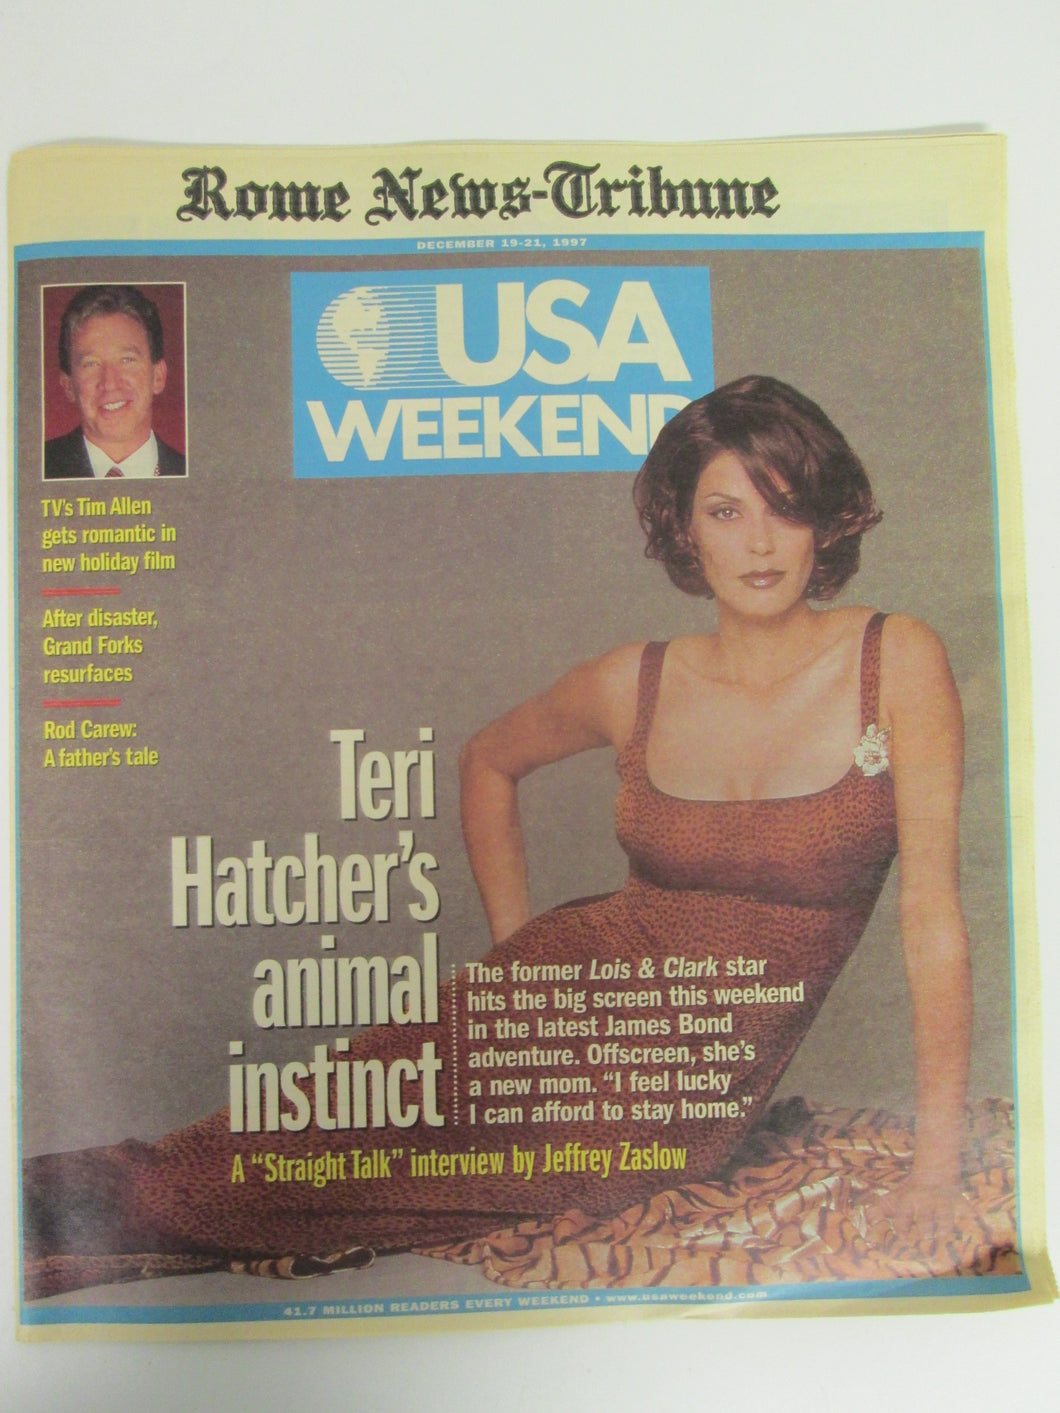 USA Weekend Teri Hatcher Cover from Rome News Tribune December 1997